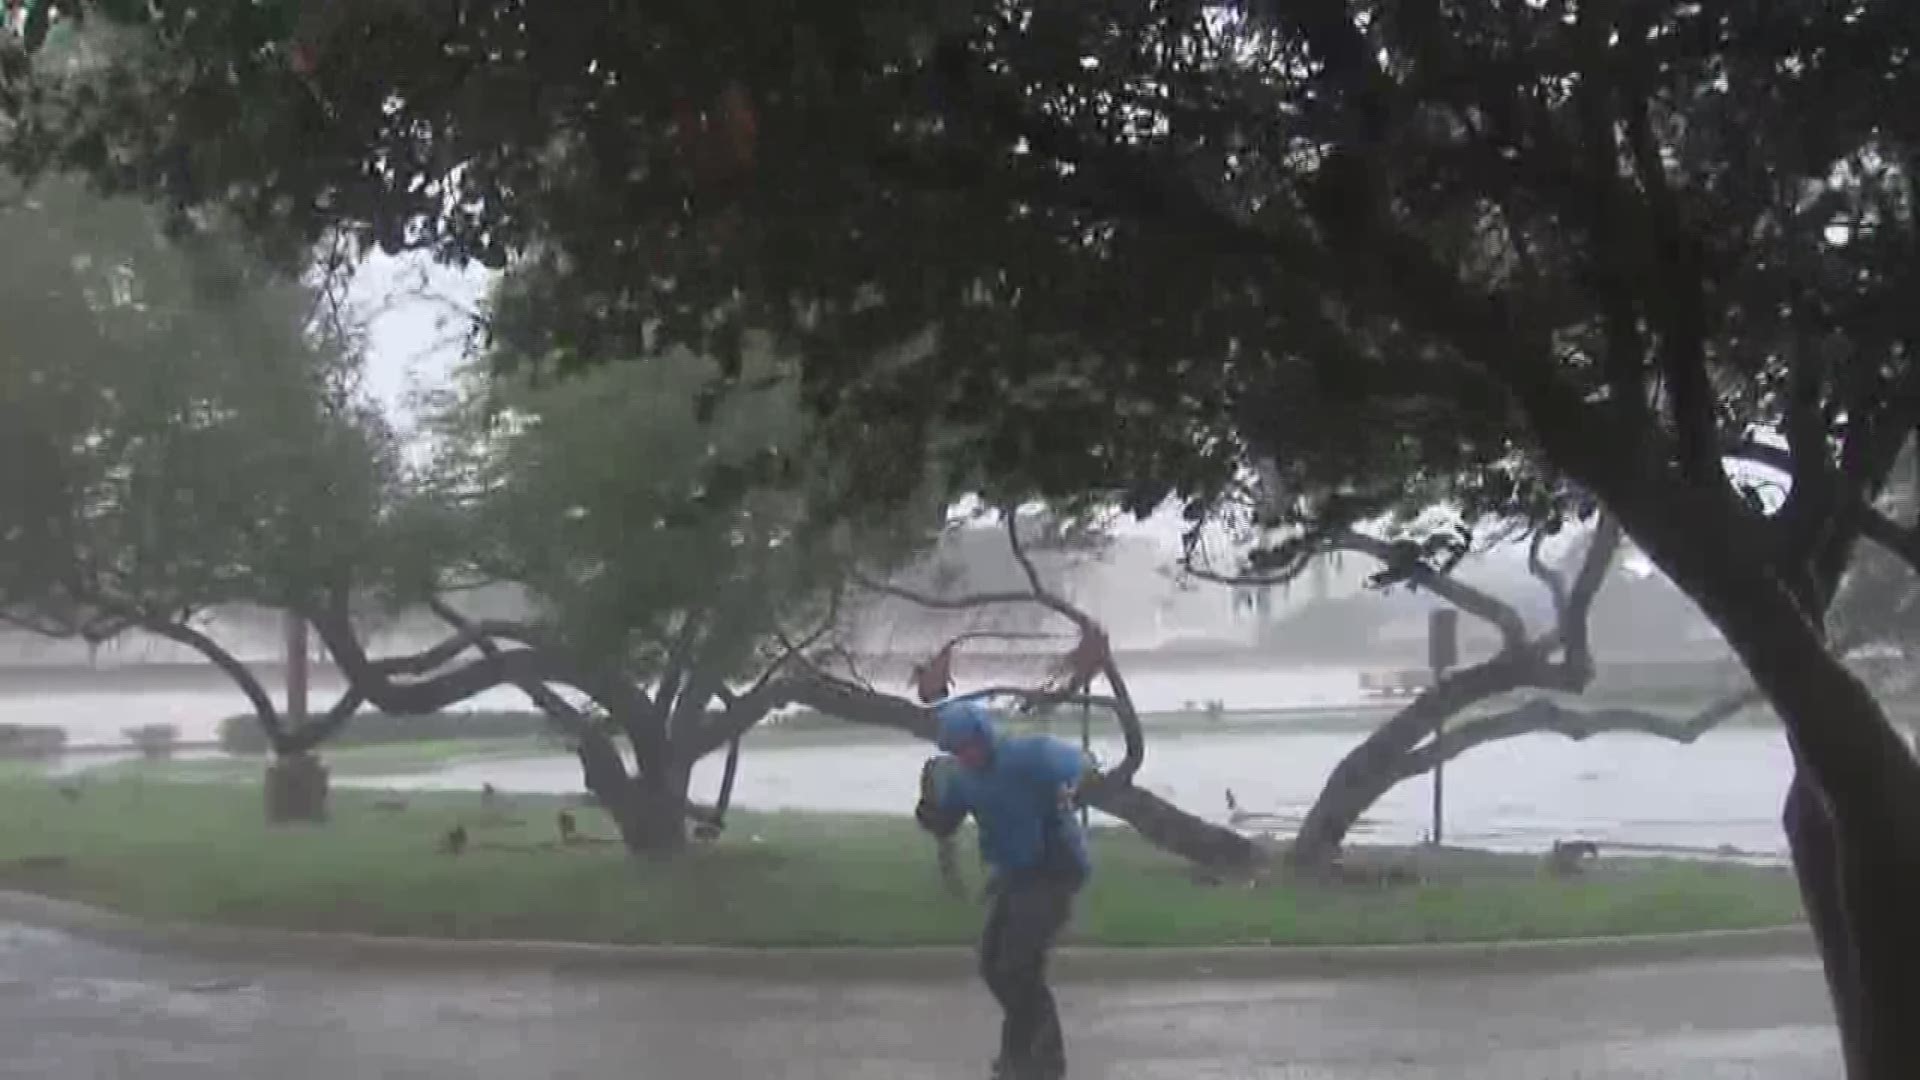 KIII Meteorologist Sean Kelly reports from Corpus Christi, where already dangerously strong winds are picking up speed. Sean is urging anyone still in the area to avoid going outside at all costs. 8/25 7:30